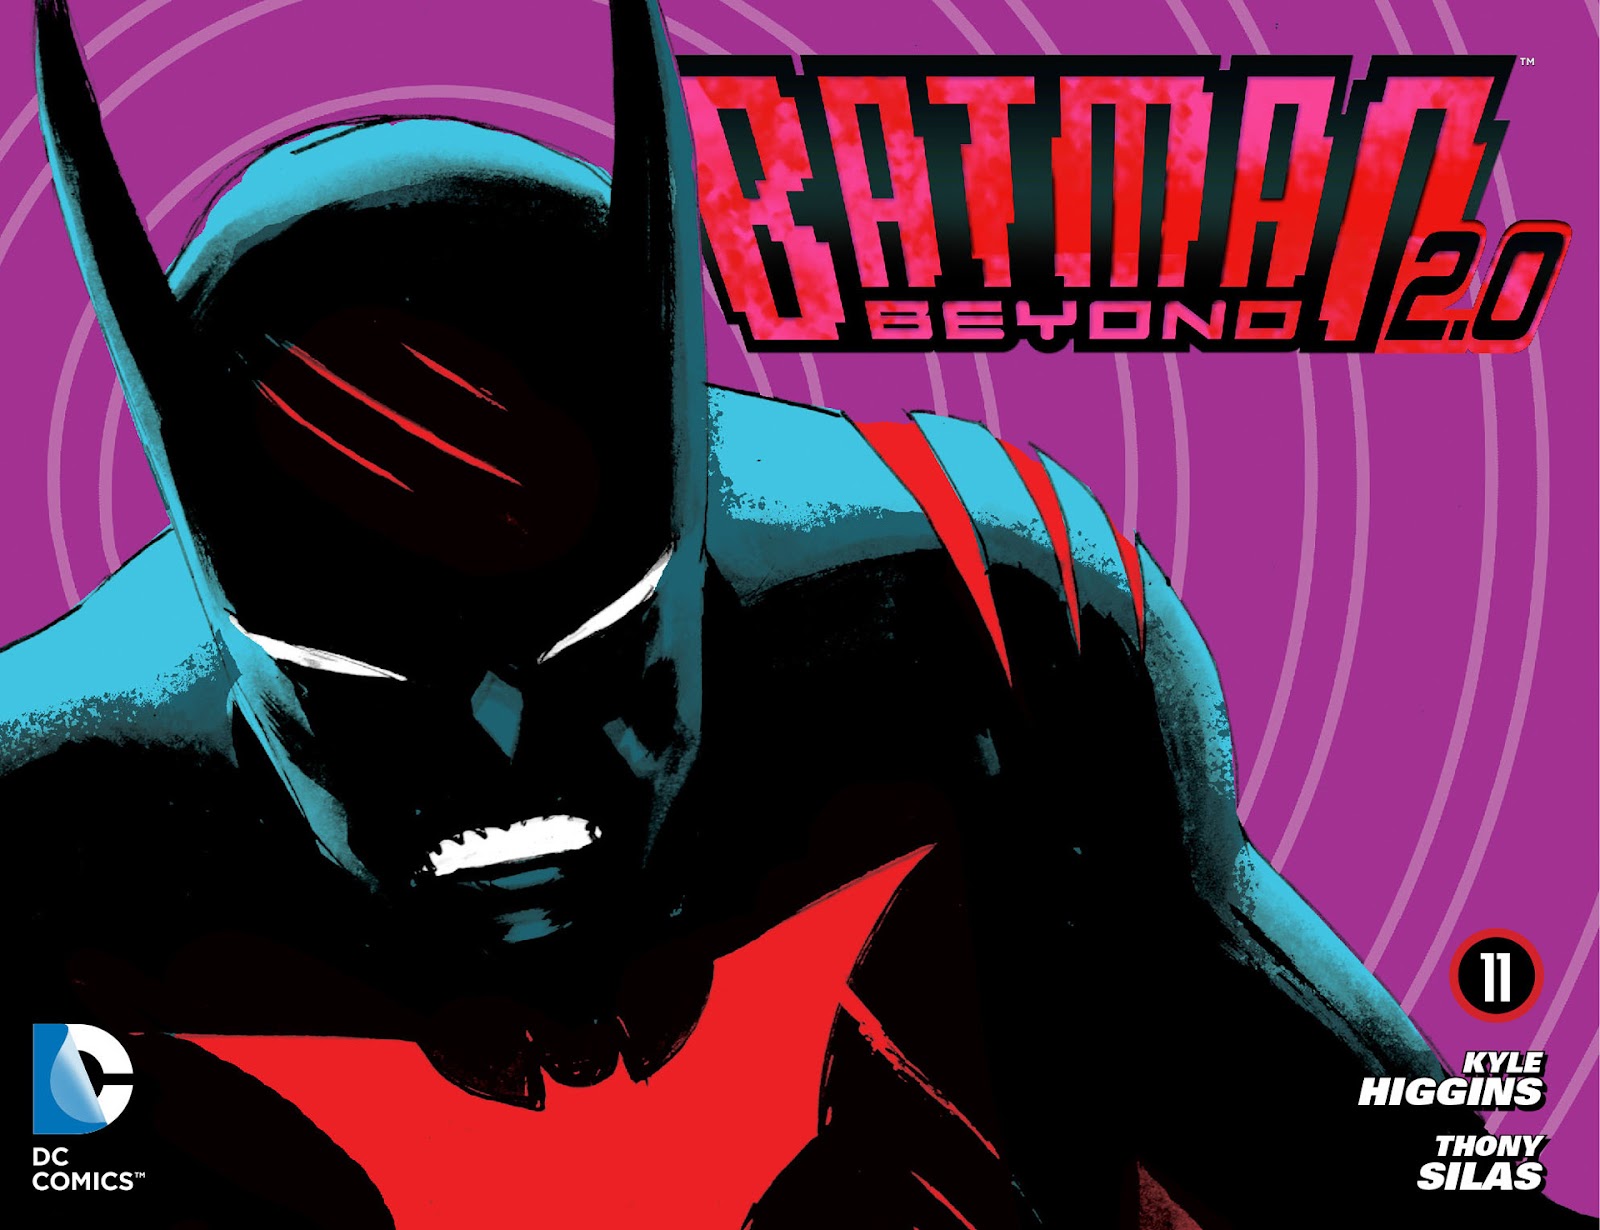 Batman Beyond 2.0 issue 11 - Page 1